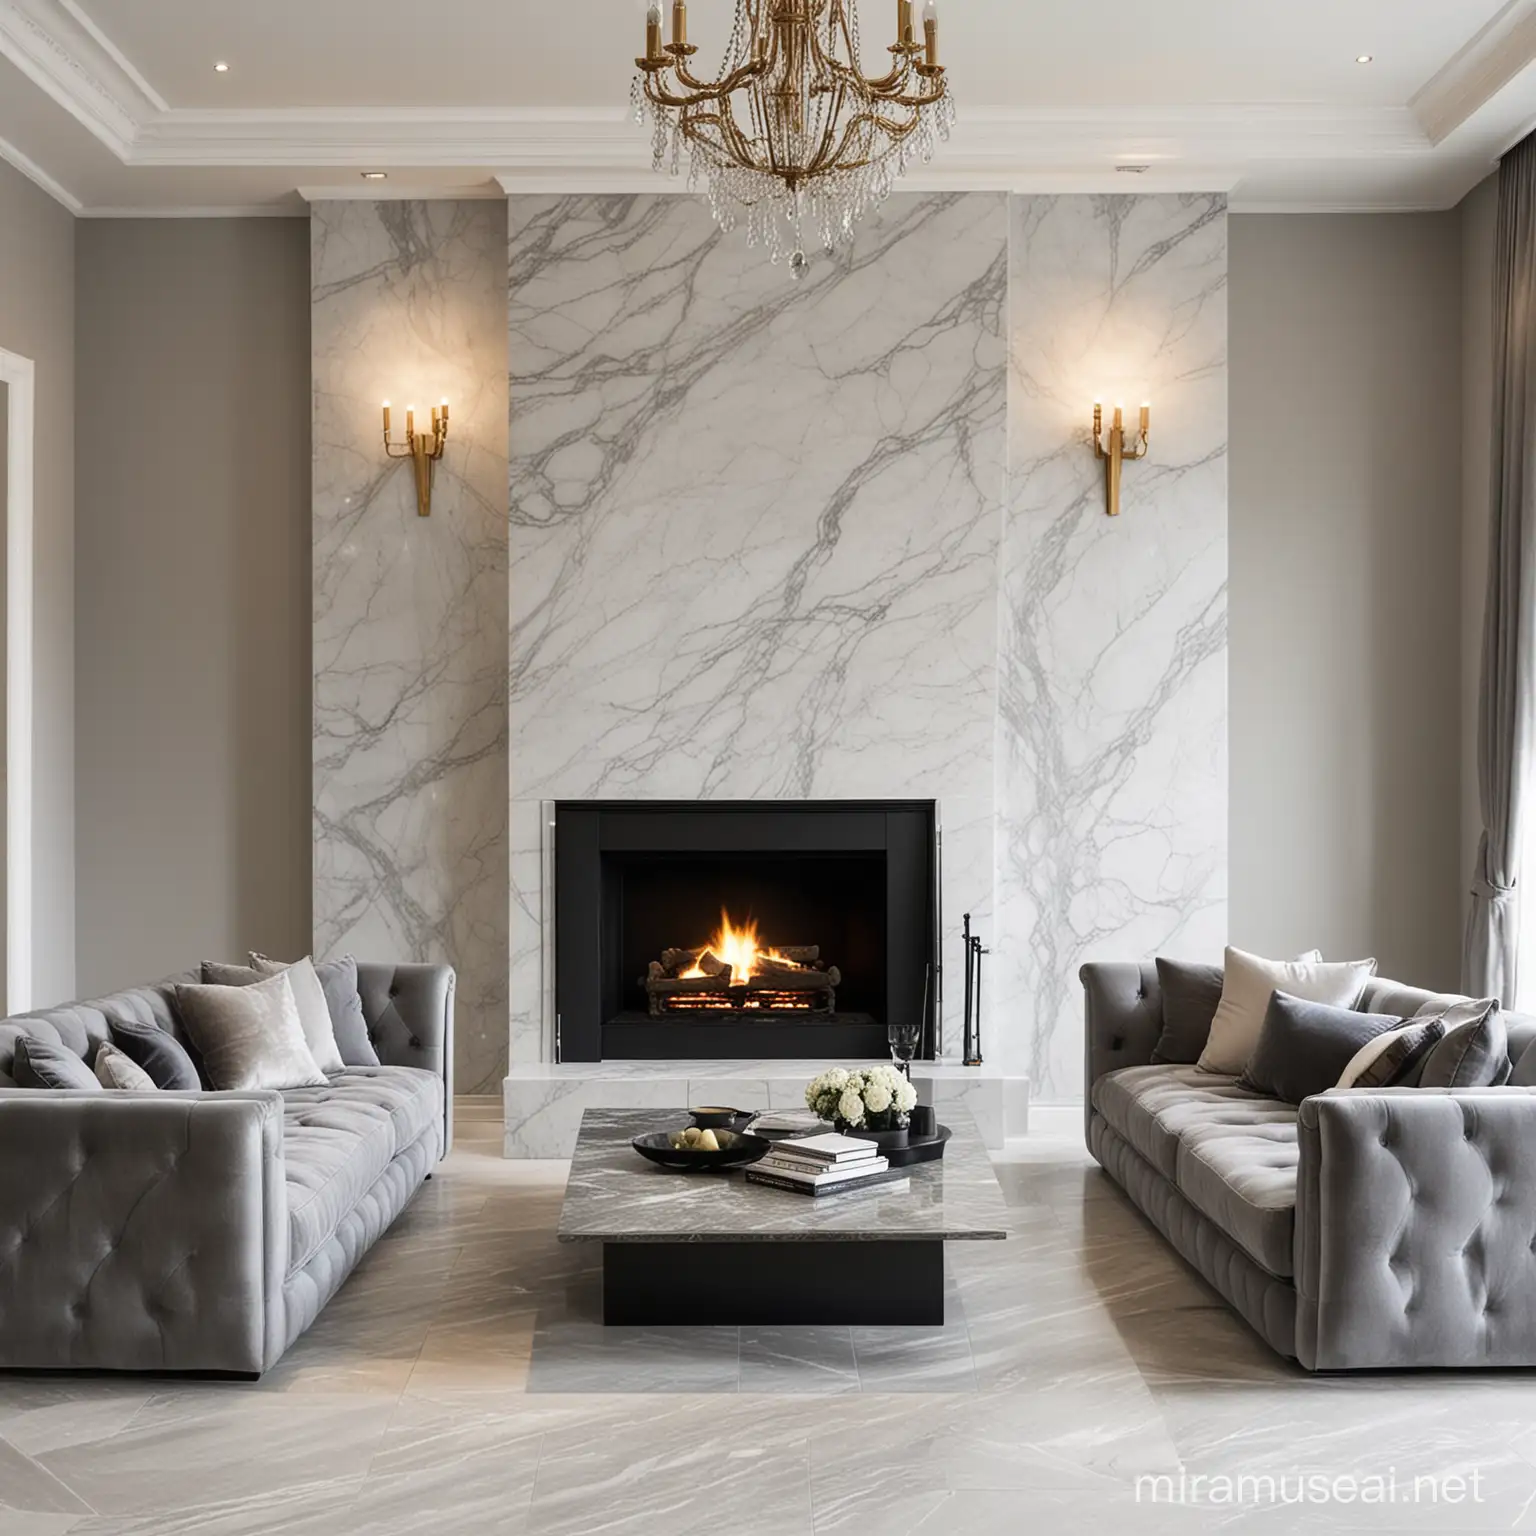 create a feature wall using a grey marble and fireplace. Make the sofa seating grand. Make it luxury and modern.